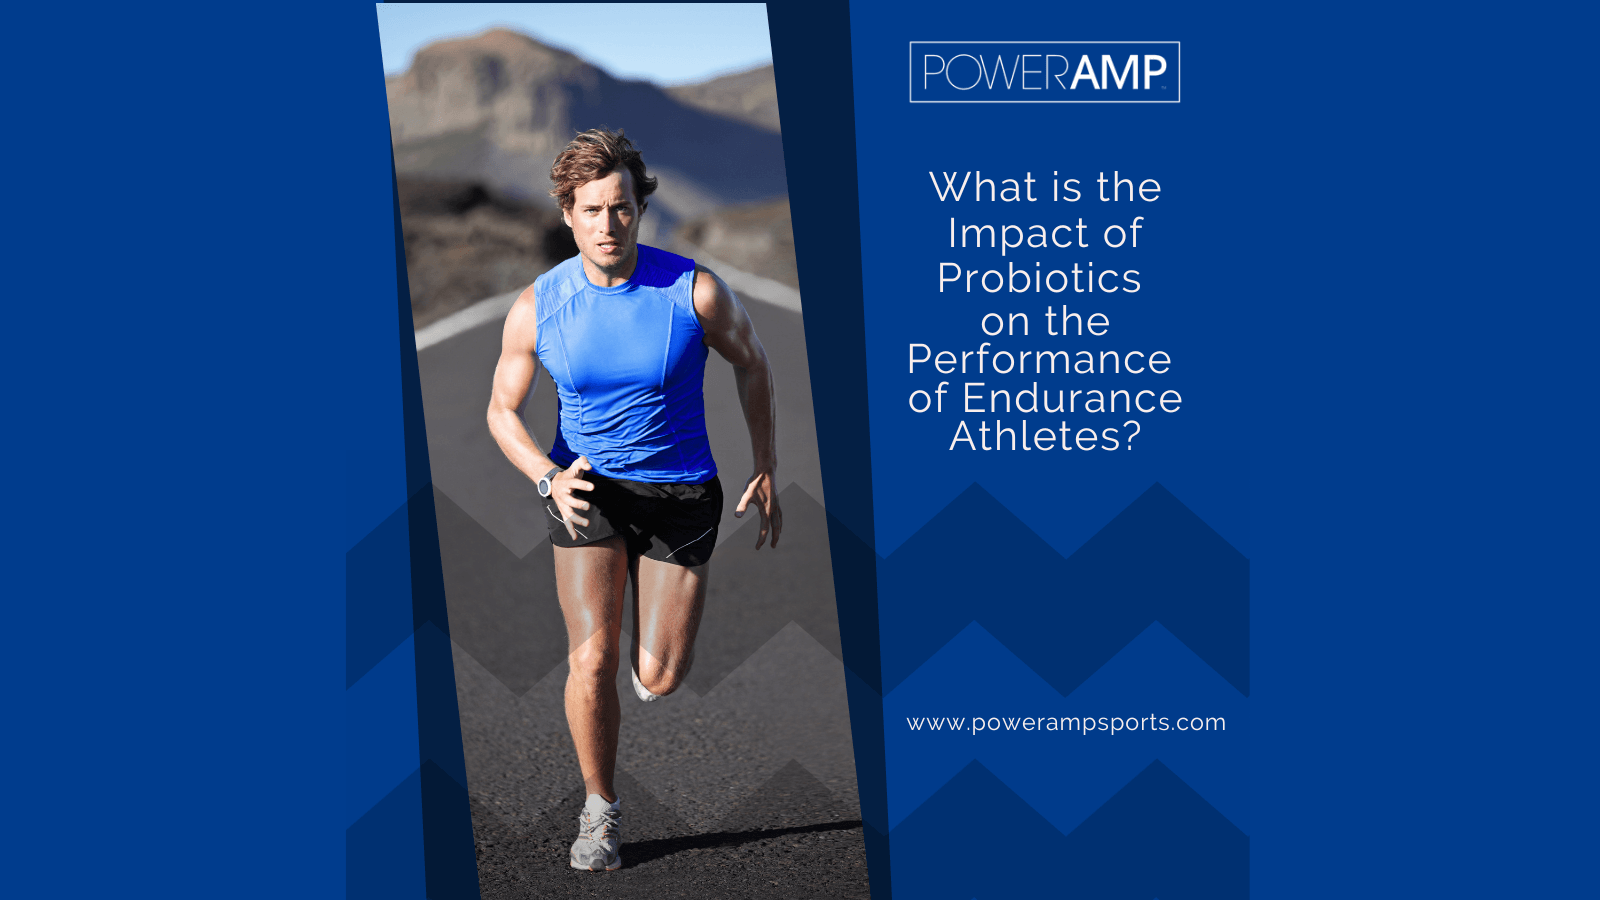 What is the Impact of Probiotics on the Performance of Endurance Athletes?